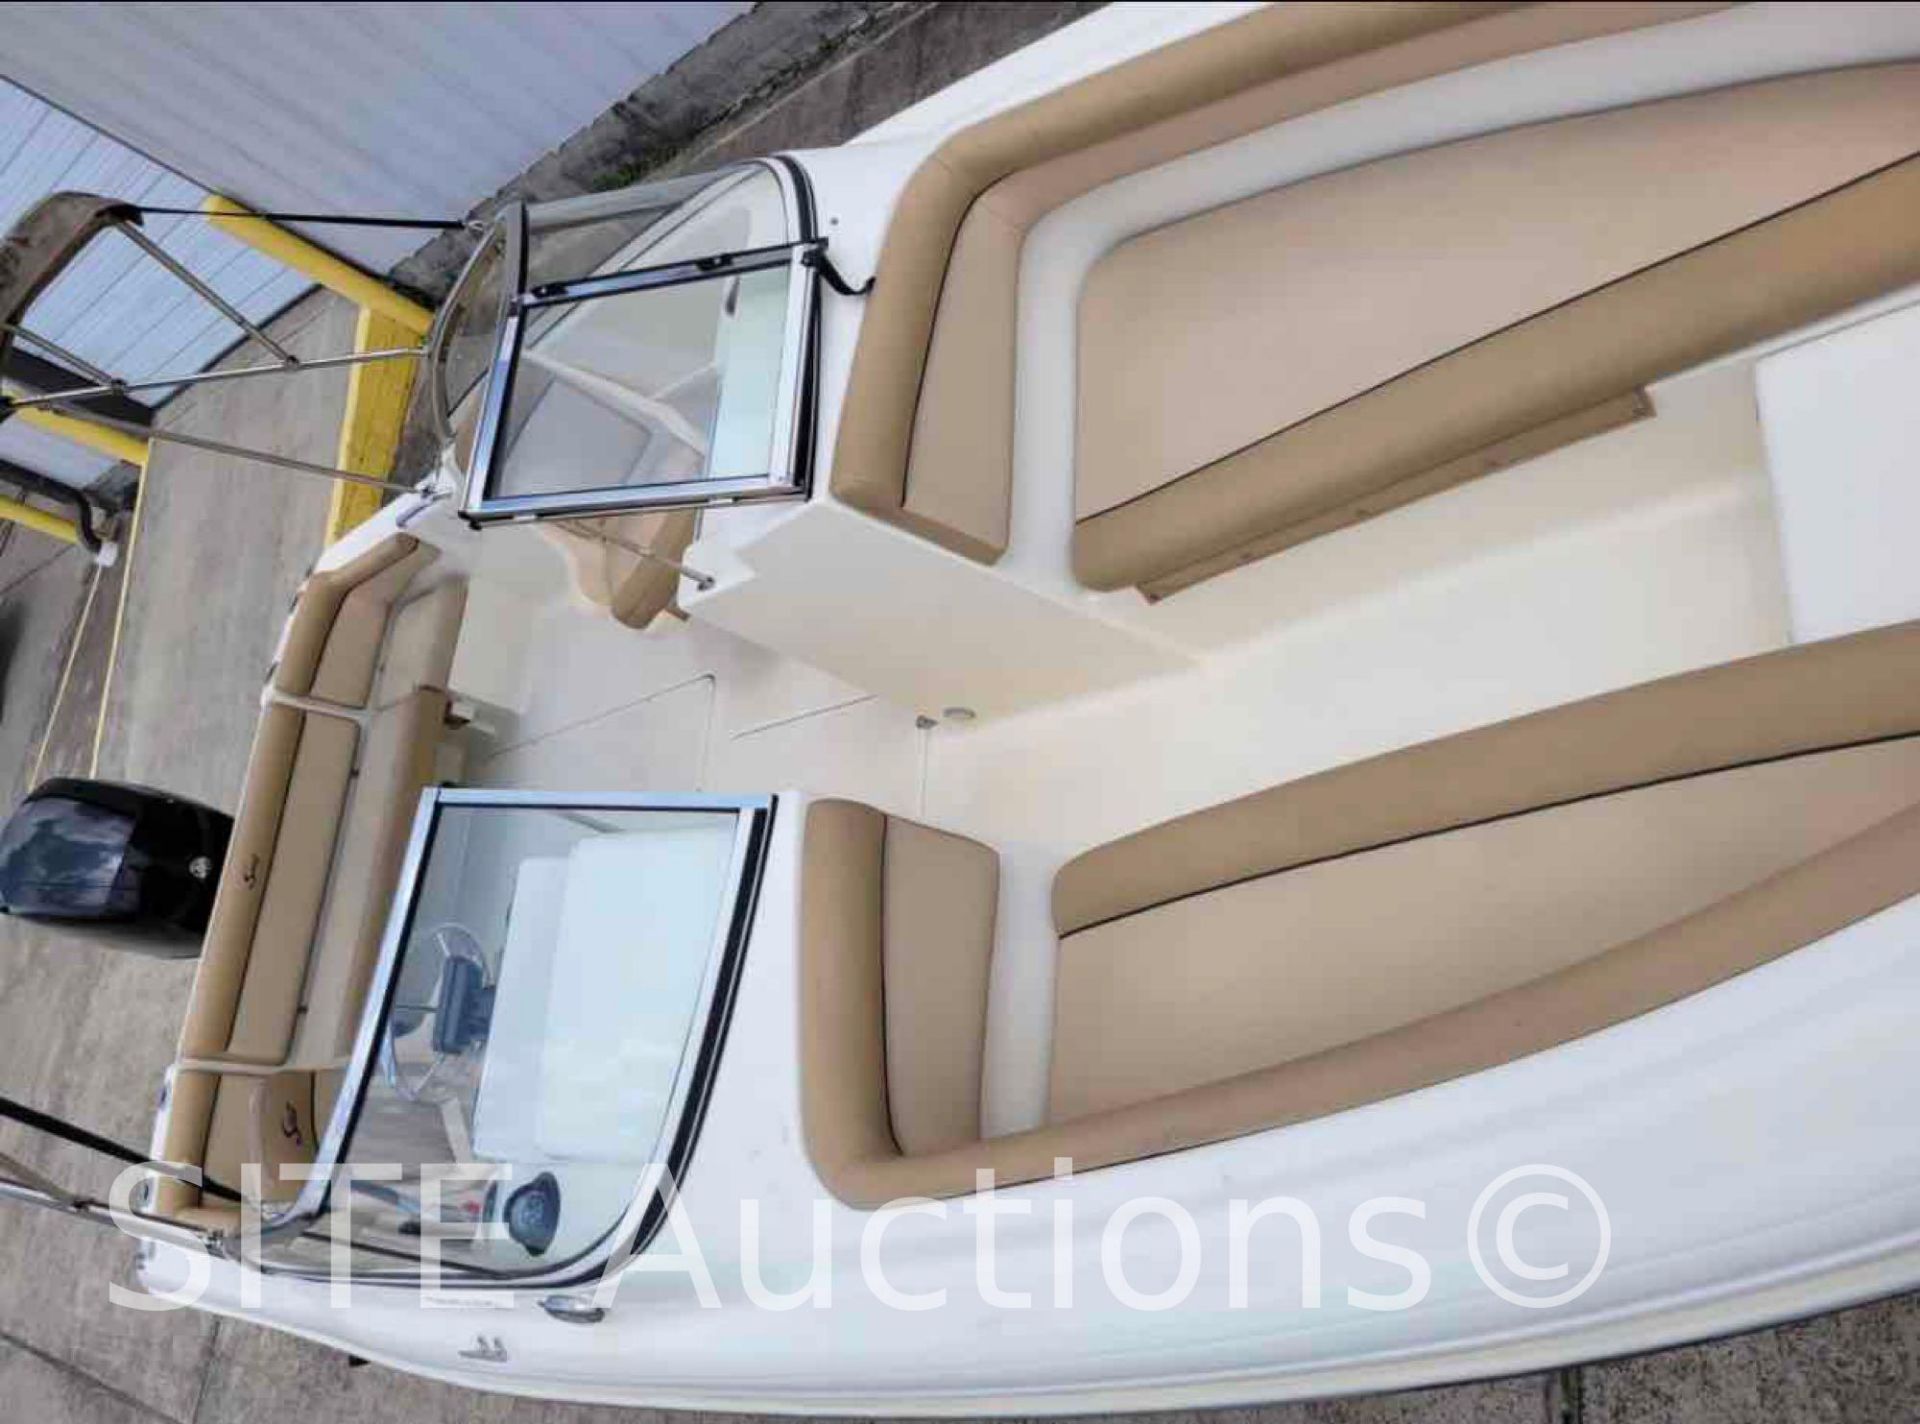 2020 Scout Dorado 20ft. Boat with Trailer - Image 13 of 21